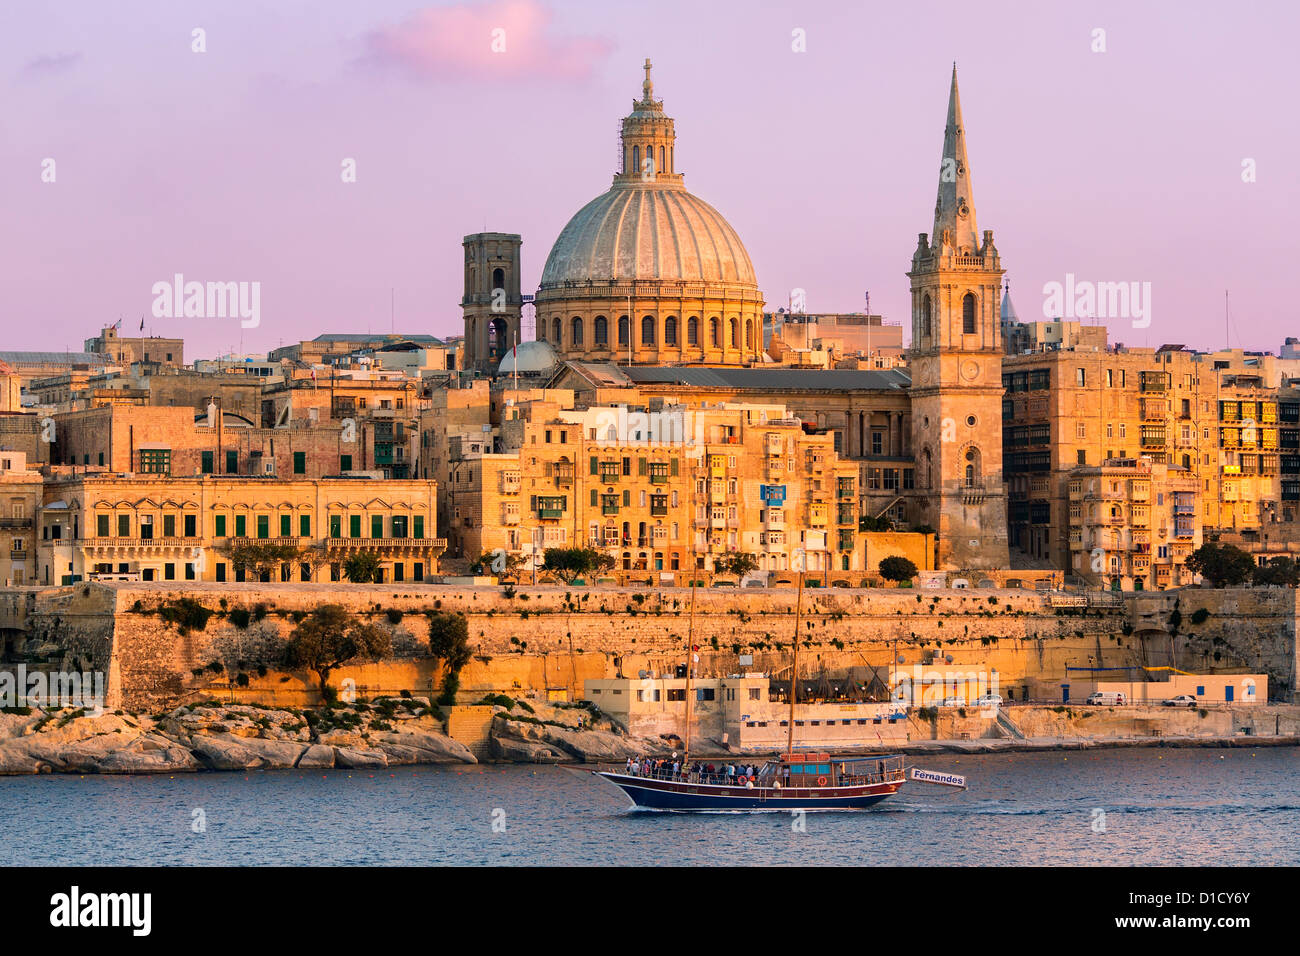 Malta, Valletta, skyline with St. Paul's Anglican Cathedral and Carmelite Church from Sliema, Stock Photo